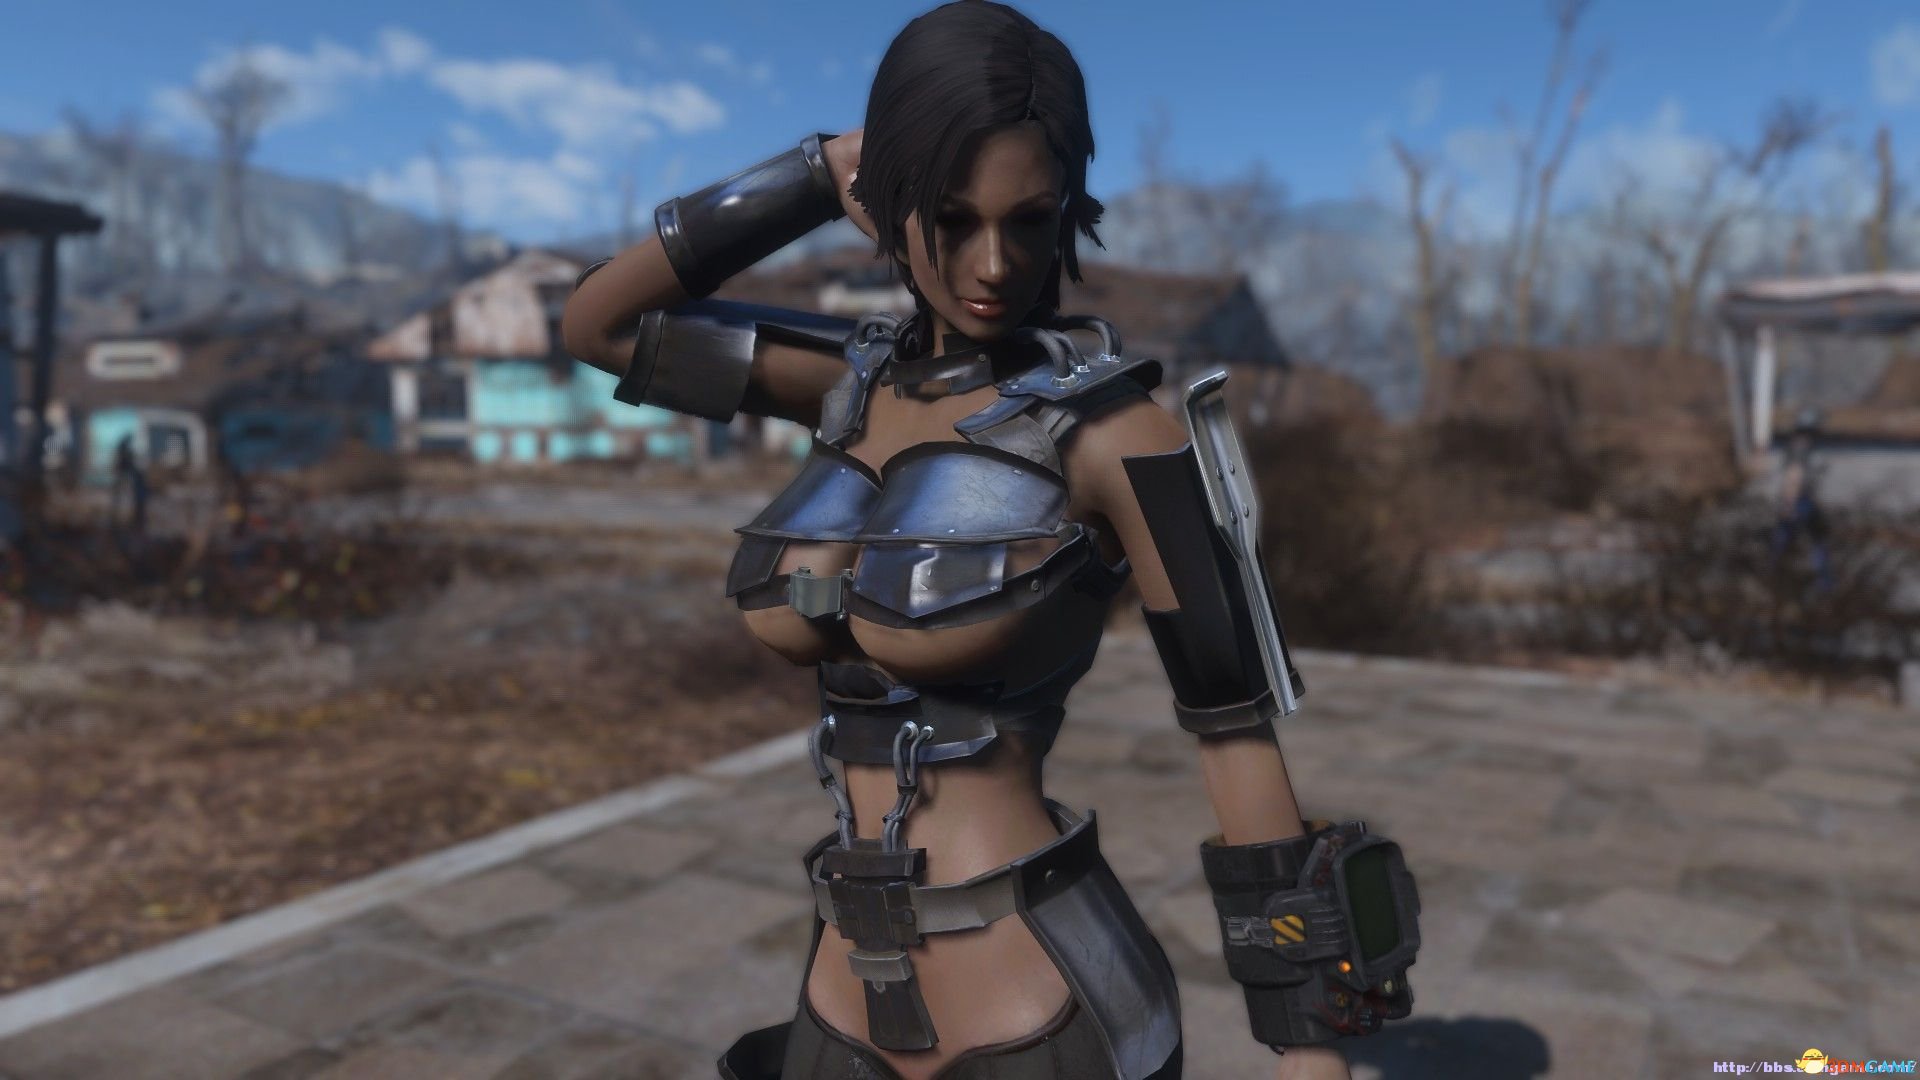 7 game mods. Фоллаут 4 CBBE +18. Фоллаут 4 мод раздеваем детей. Fallout 4 Mods Hunters Armors. Deathclaw Hunter Armor CBBE.